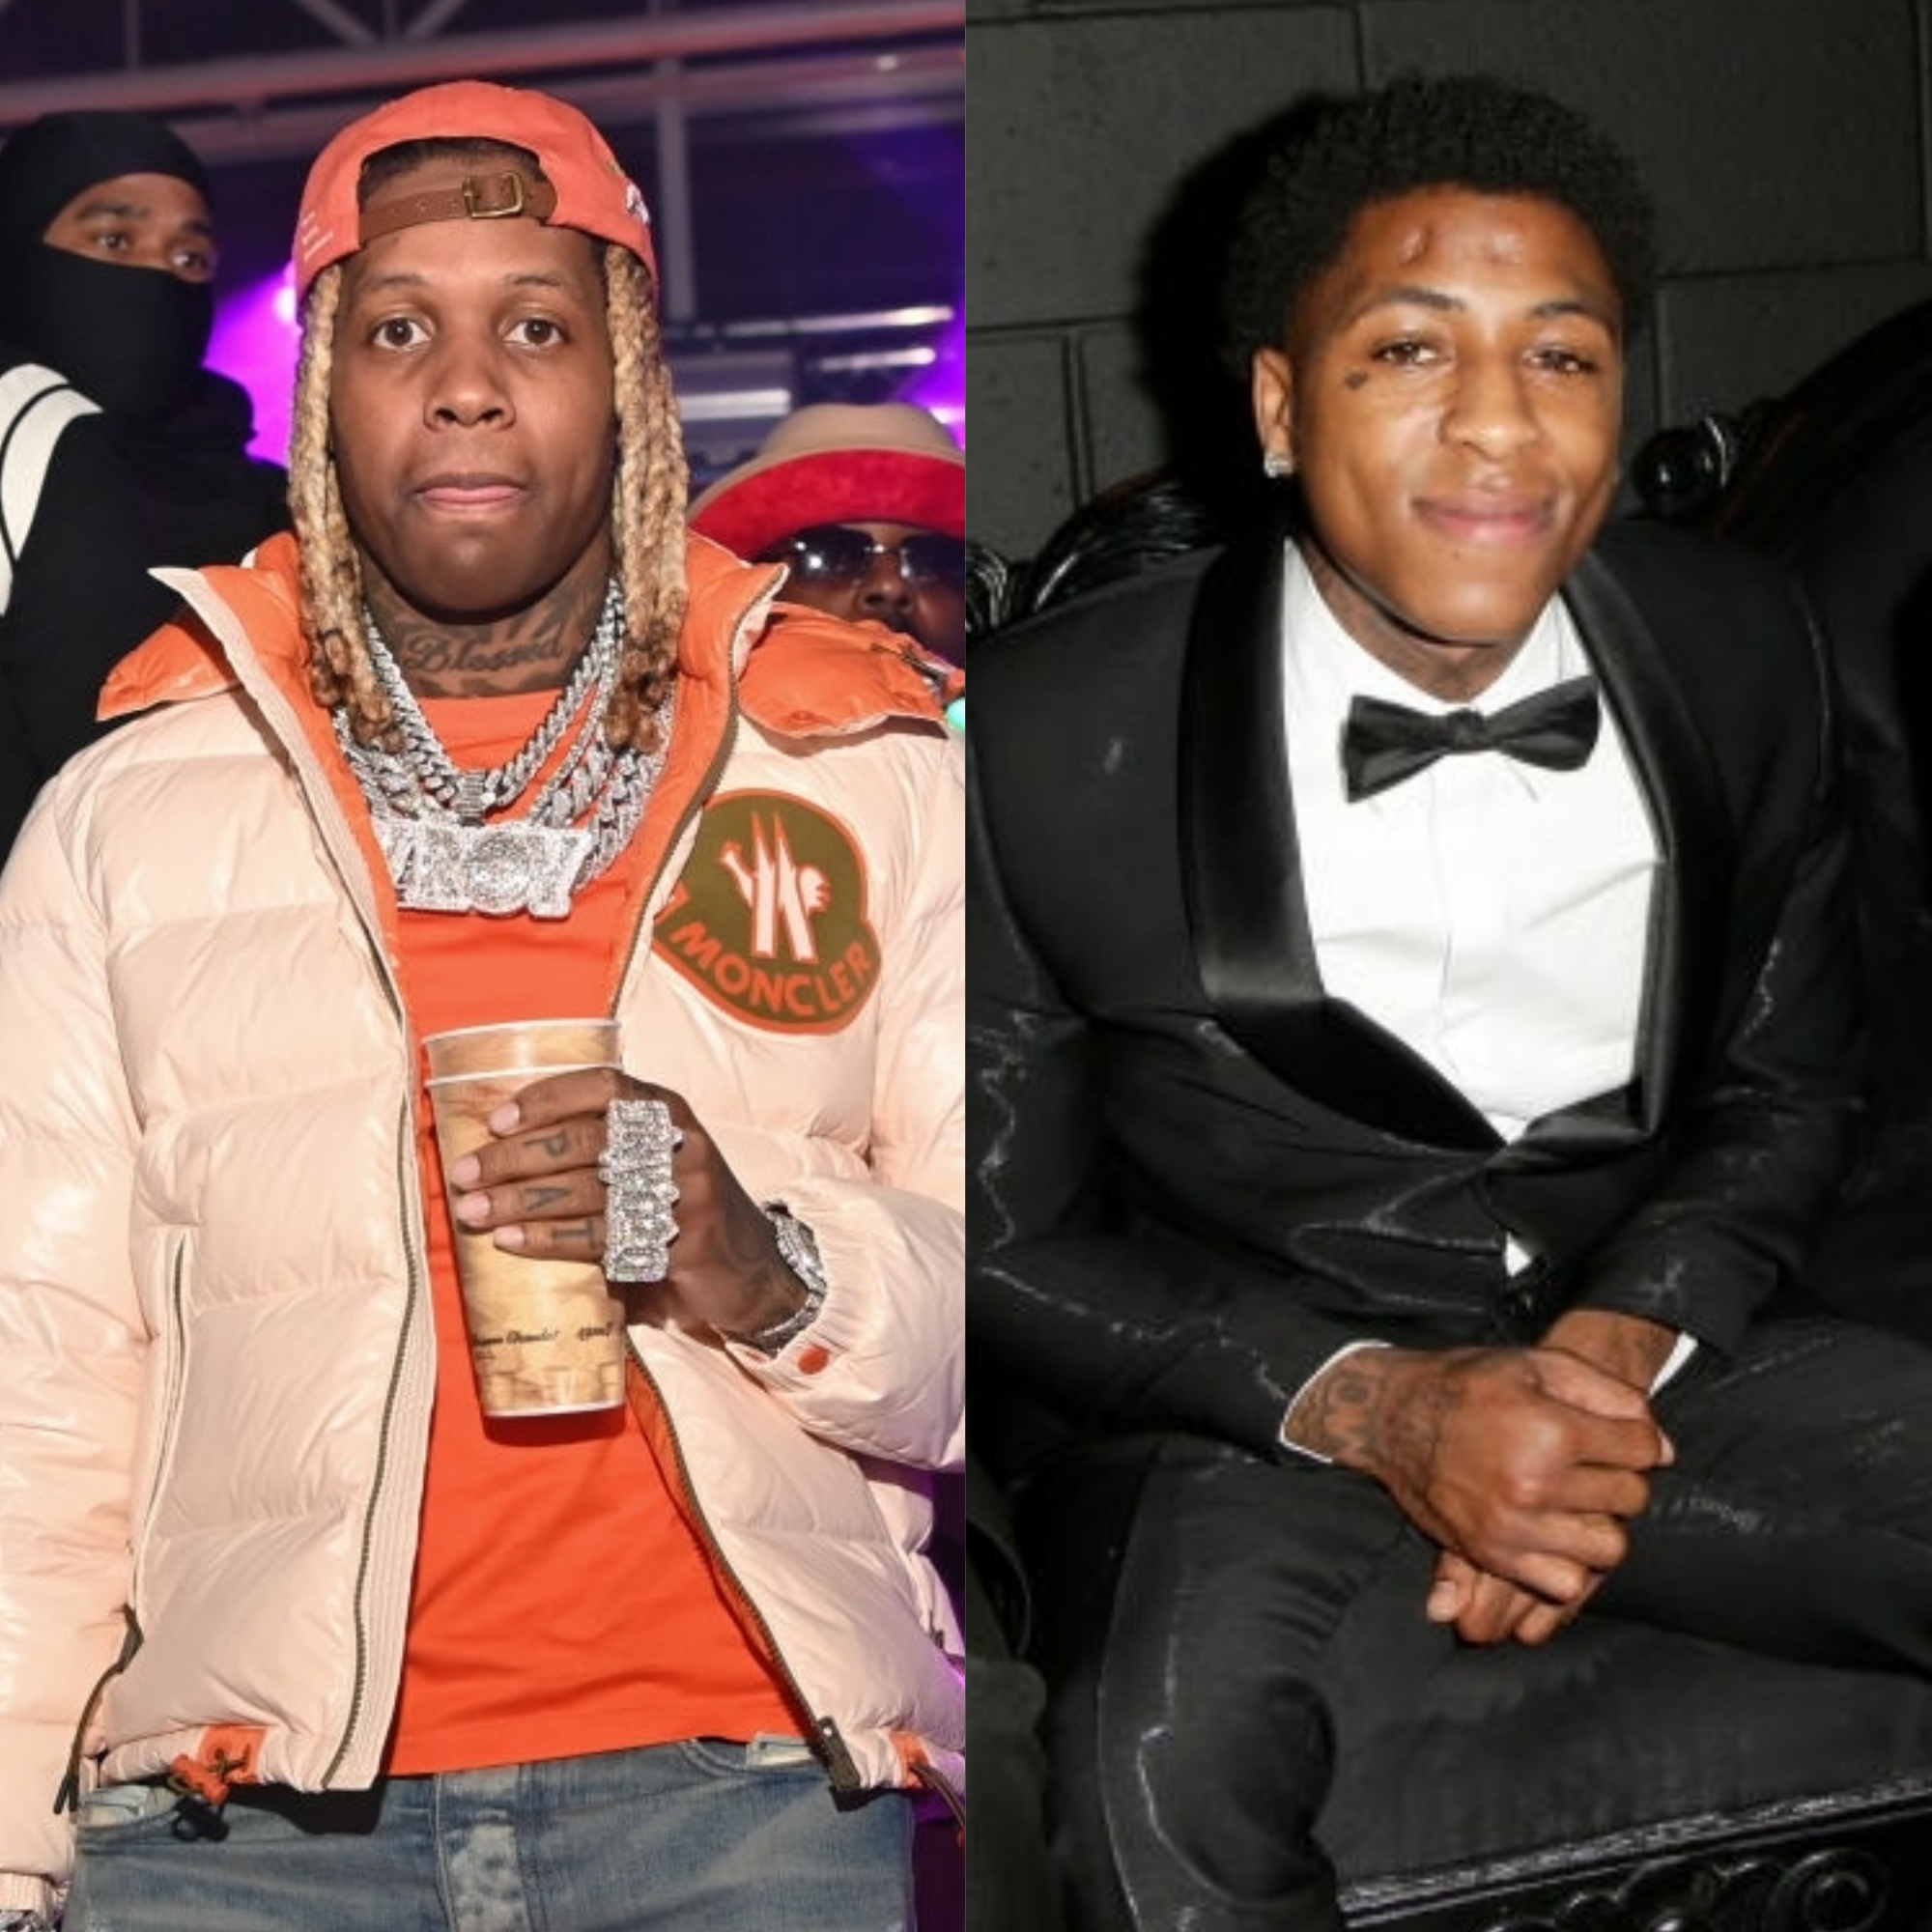 Gucci Mane Calls Out NBA YoungBoy in 'Publicity Stunt